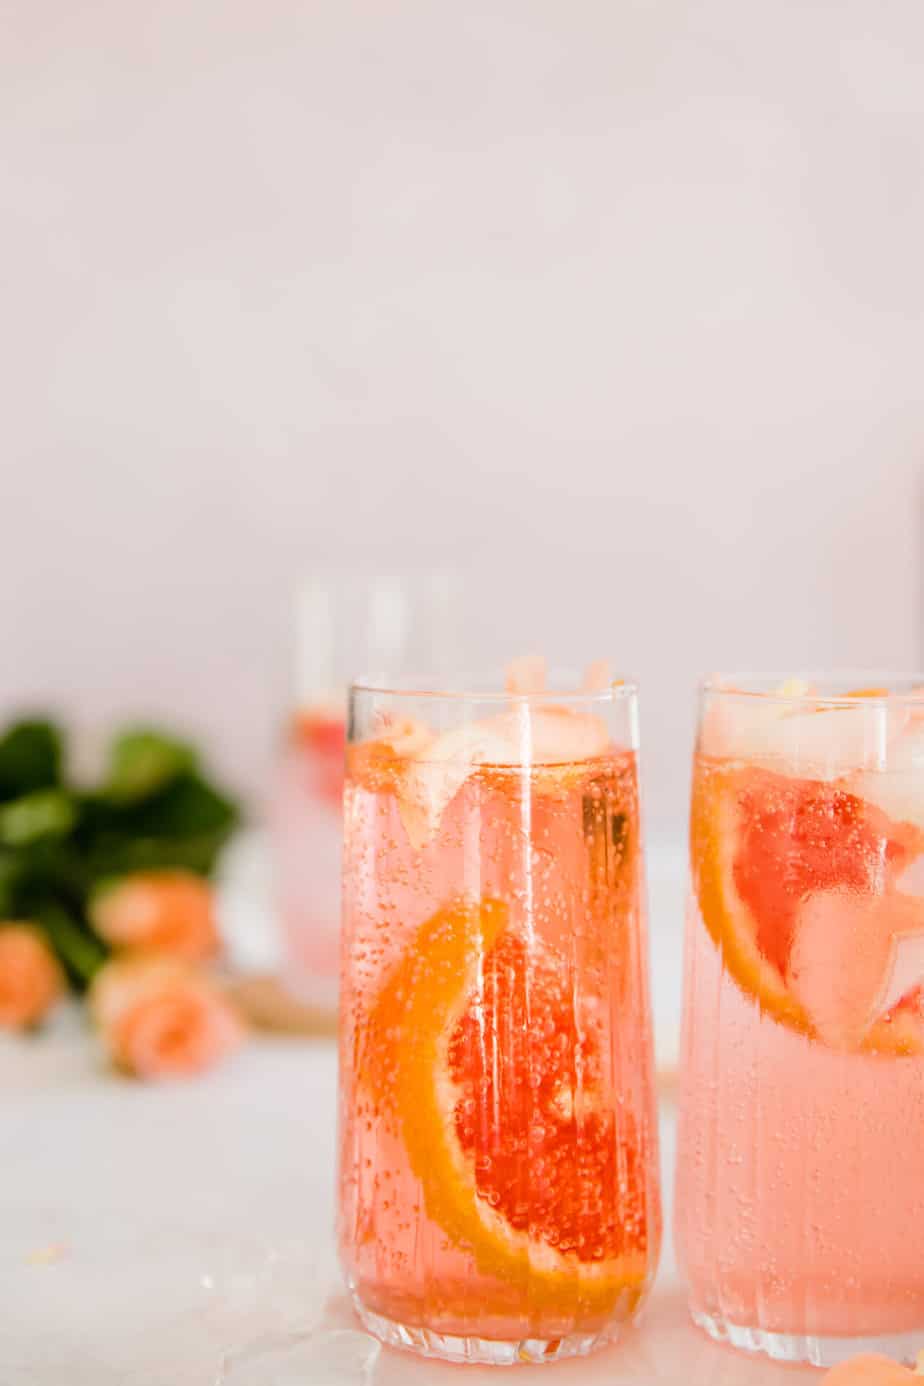 A mixed cocktail with fresh grapefruit and rose petals.